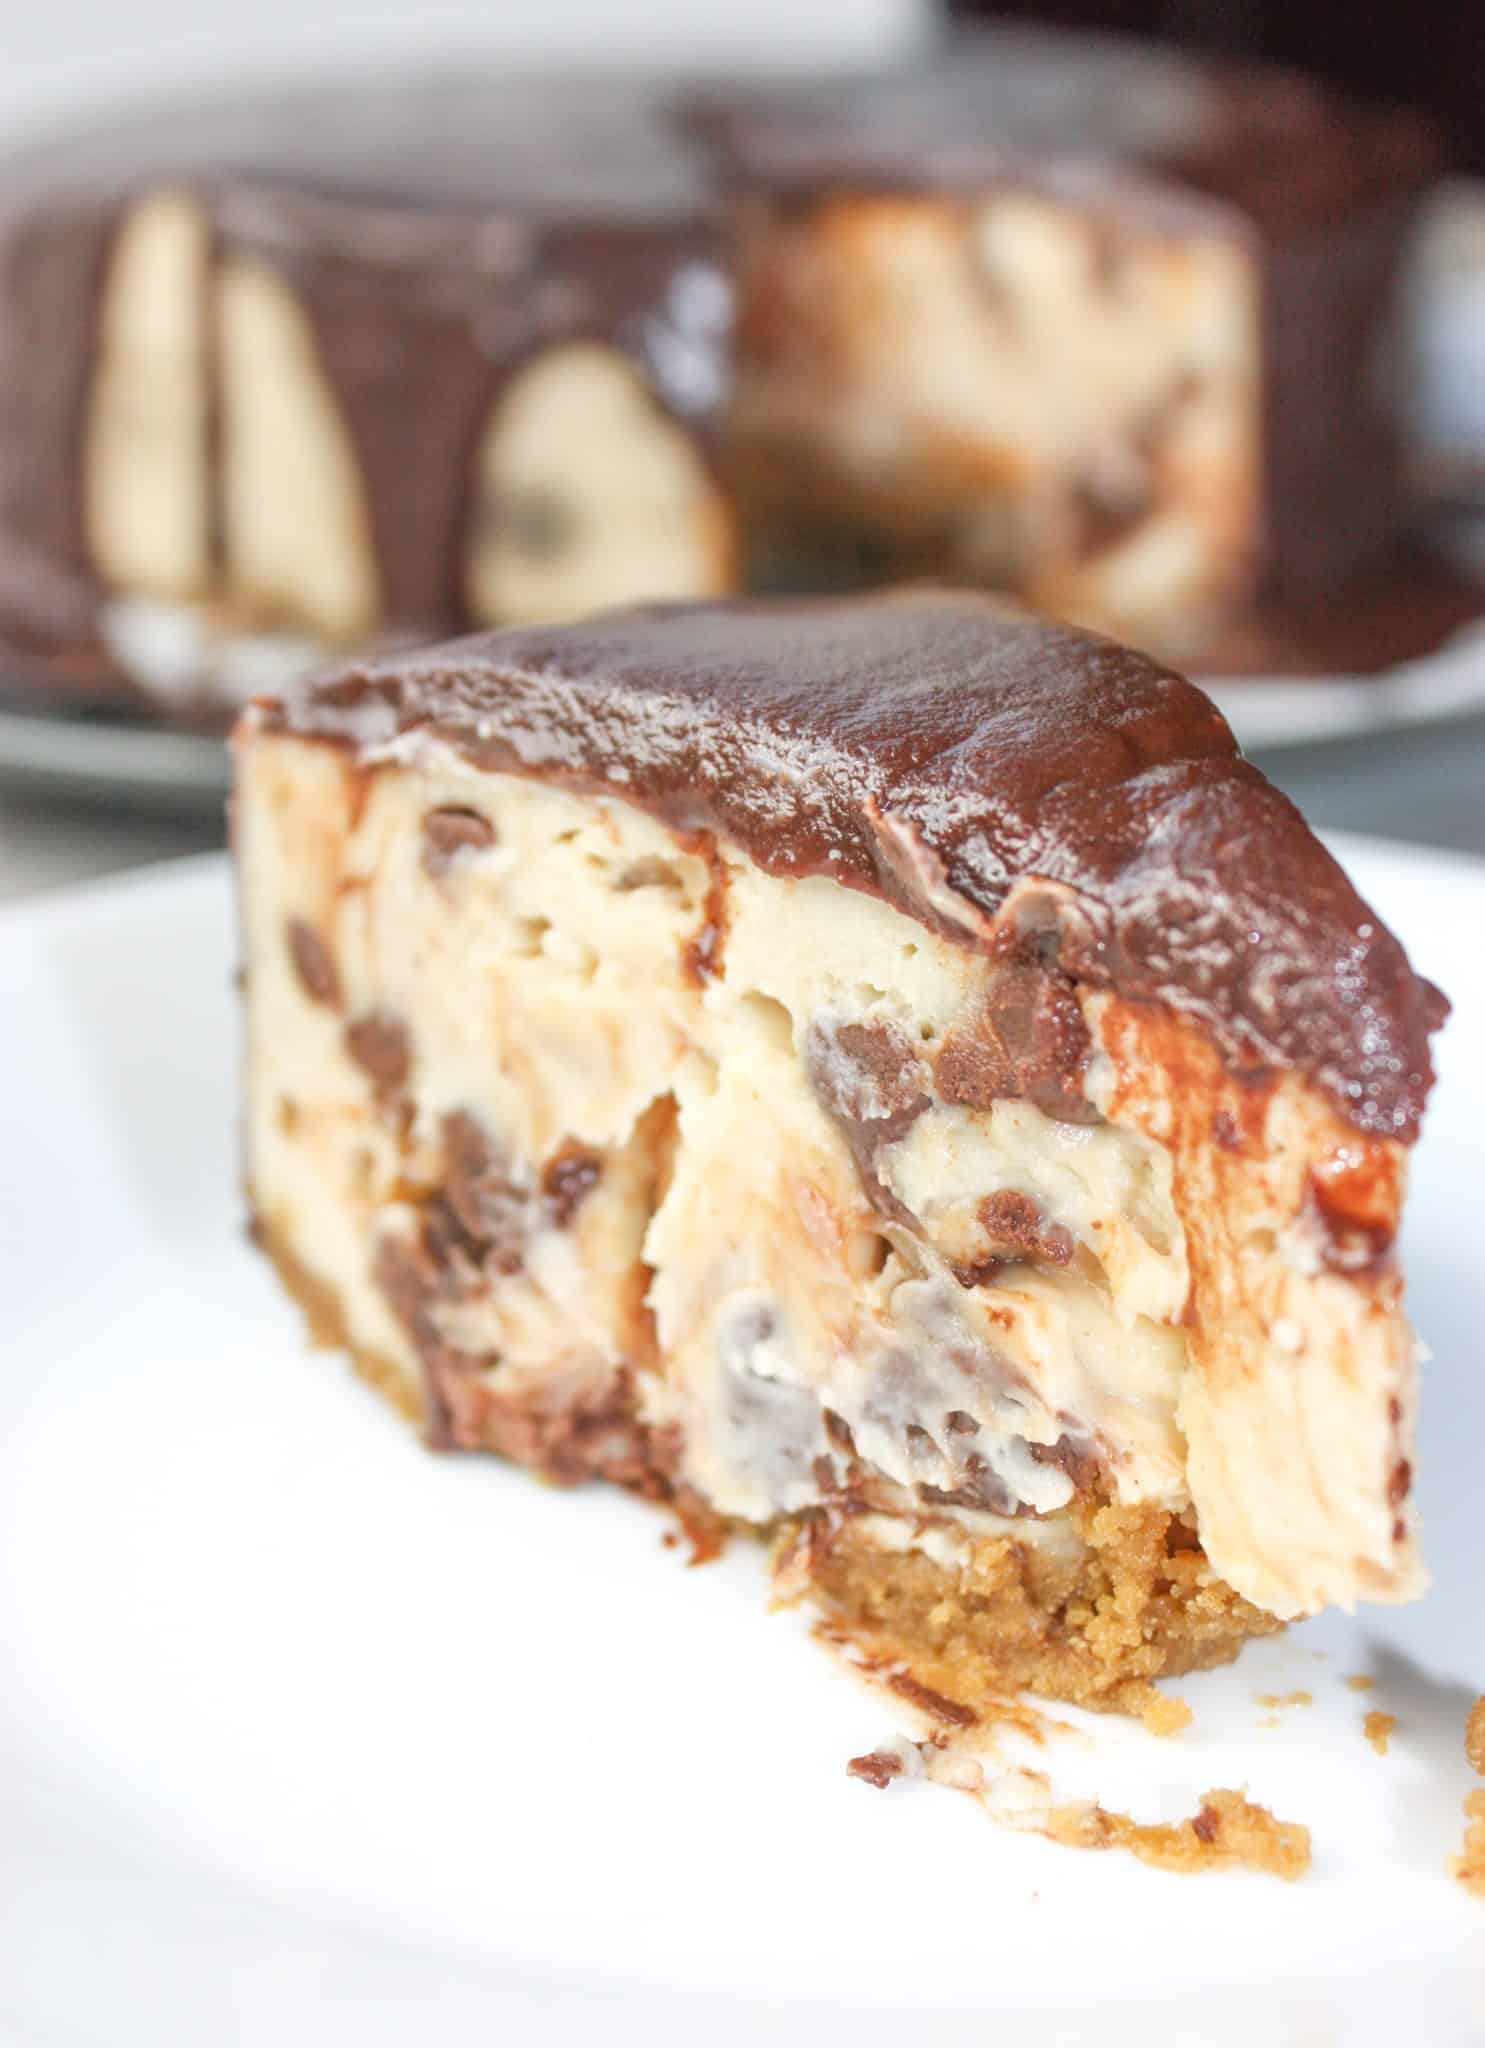 Instant Pot Peanut Butter Chocolate Cheesecake uses my favourite flavour combination. Thanks to the Instant Pot I can easily make a dairy free cheesecake with a gluten free crust!